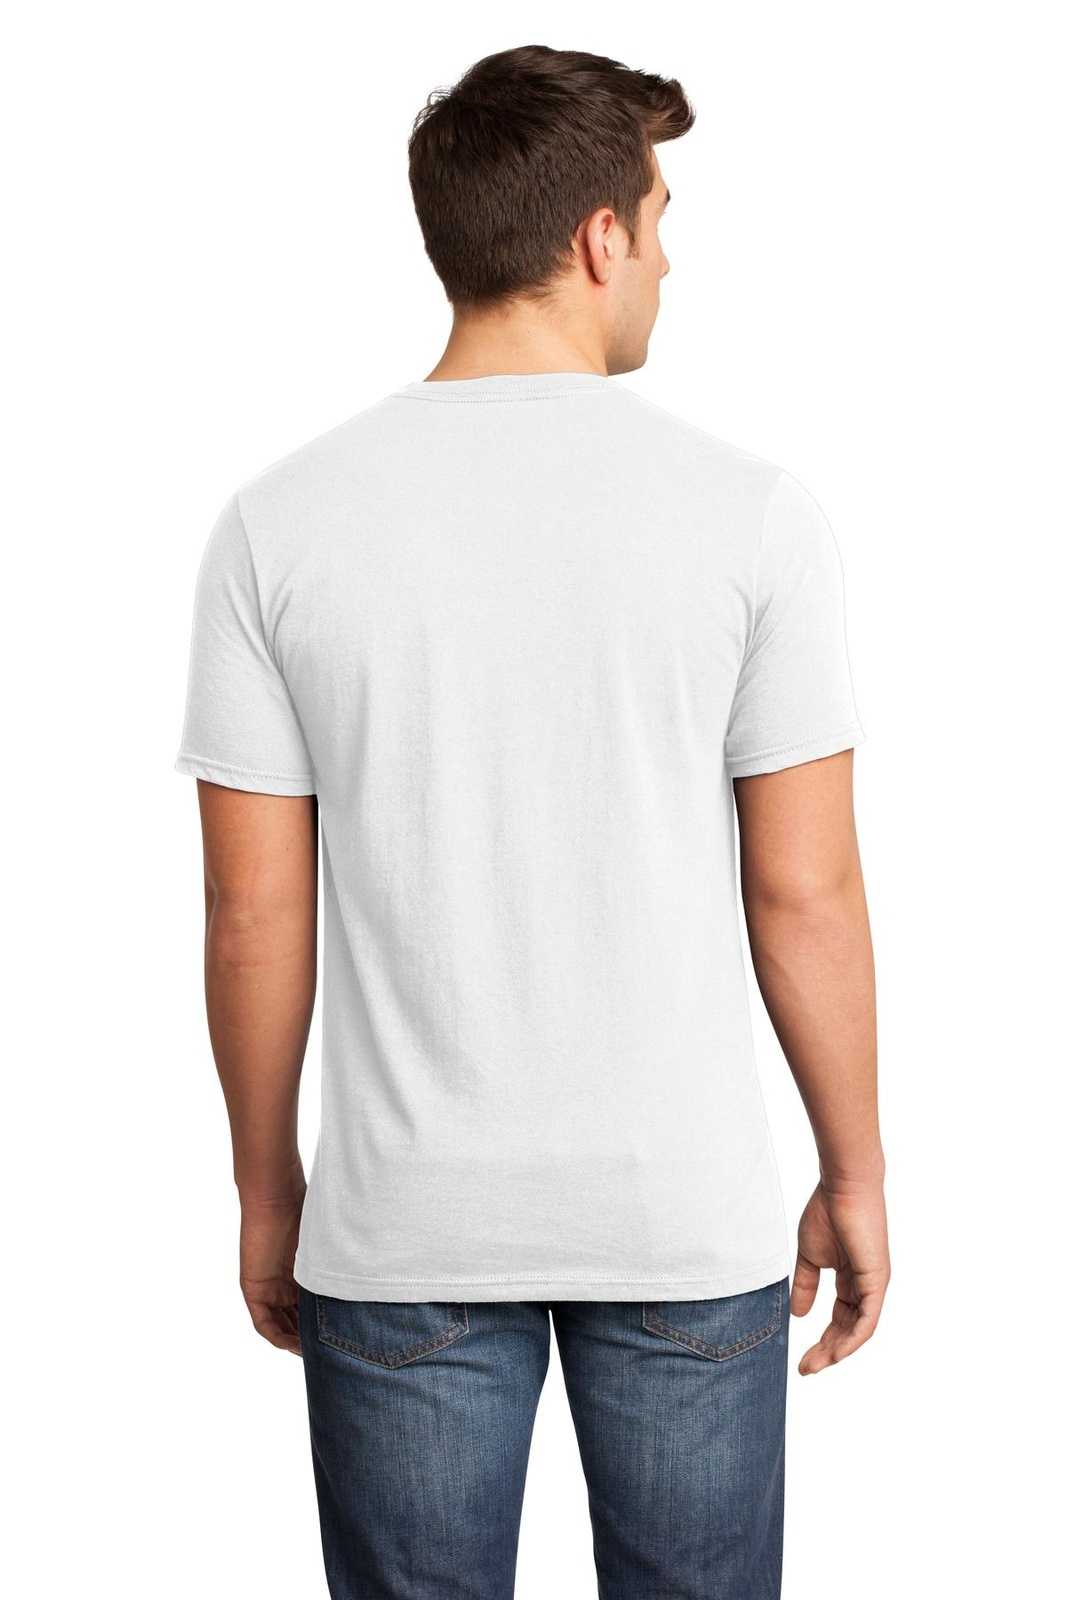 District DT6500 Very Important Tee V-Neck - White - HIT a Double - 2